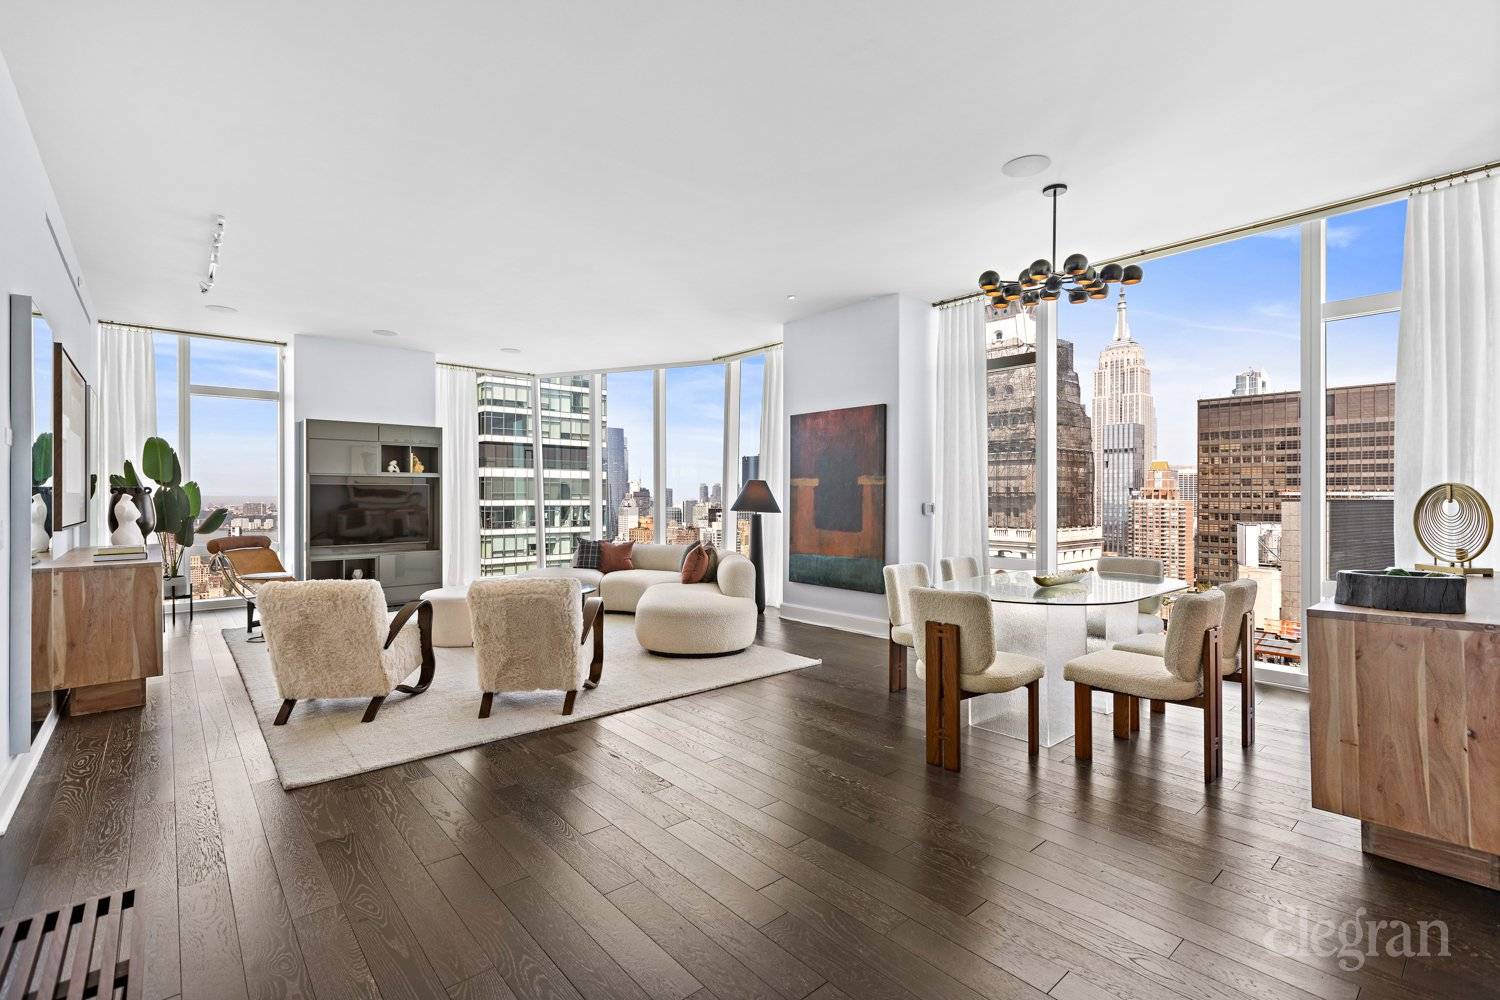 Welcome to 46 A at Madison Square Park Tower, offering the most breathtaking views of New York City.